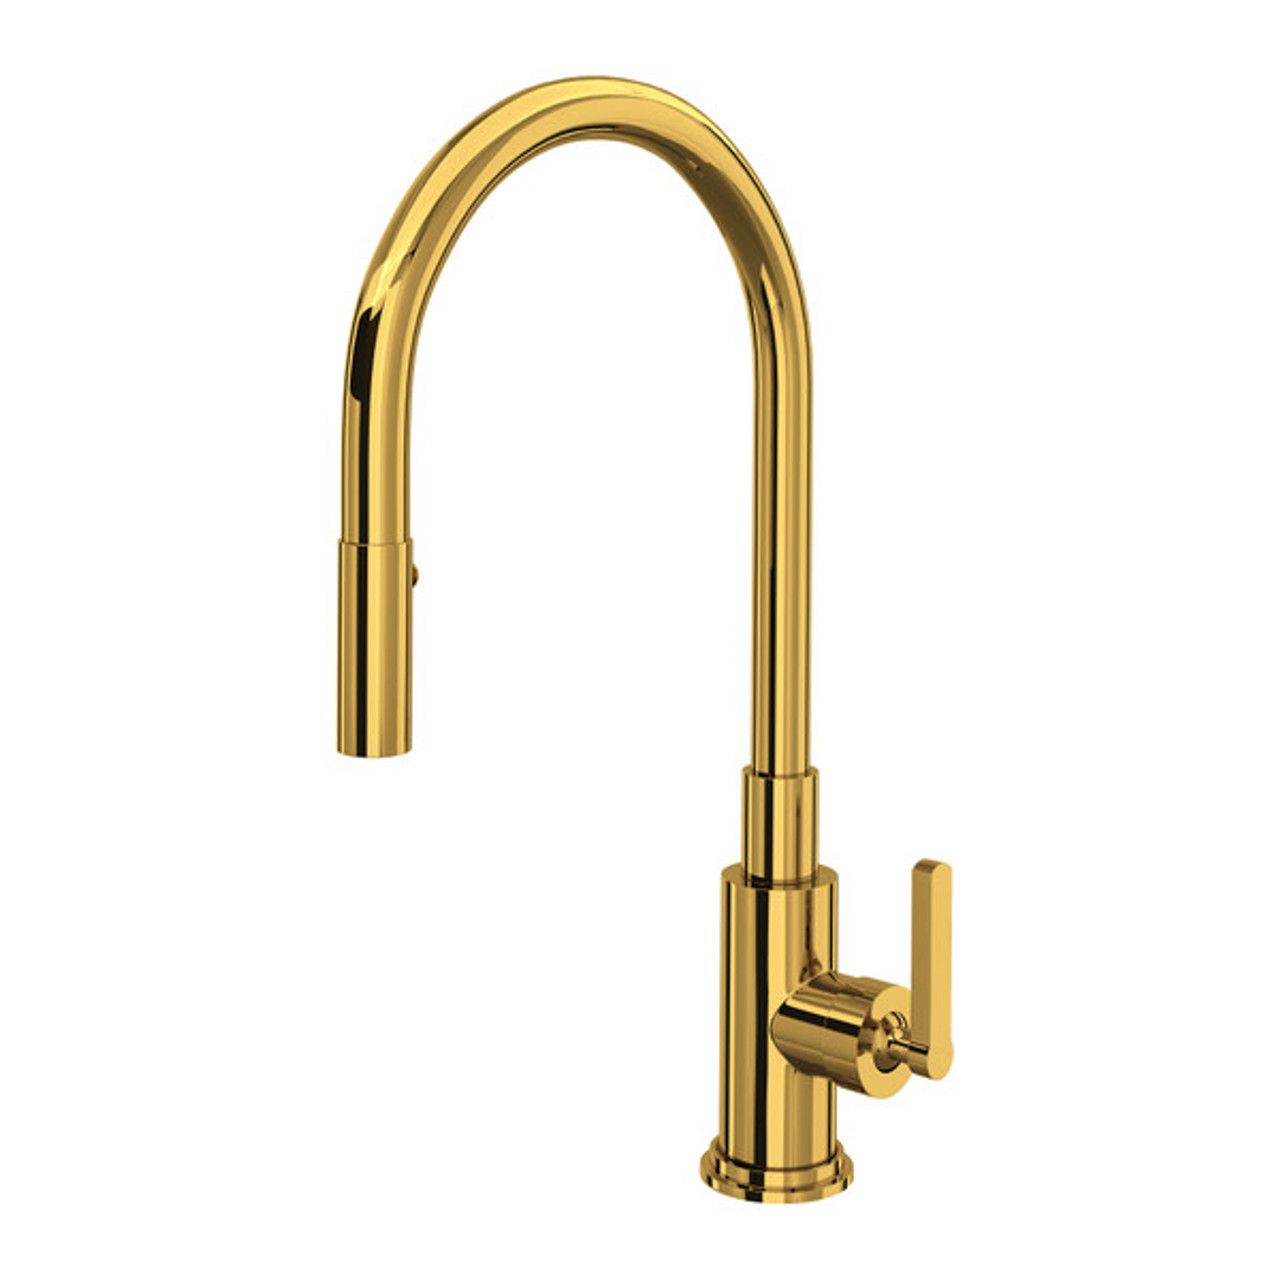 ROHL Lombardia Pulldown Kitchen Faucet - Unlacquered Brass With Metal Lever  Handle